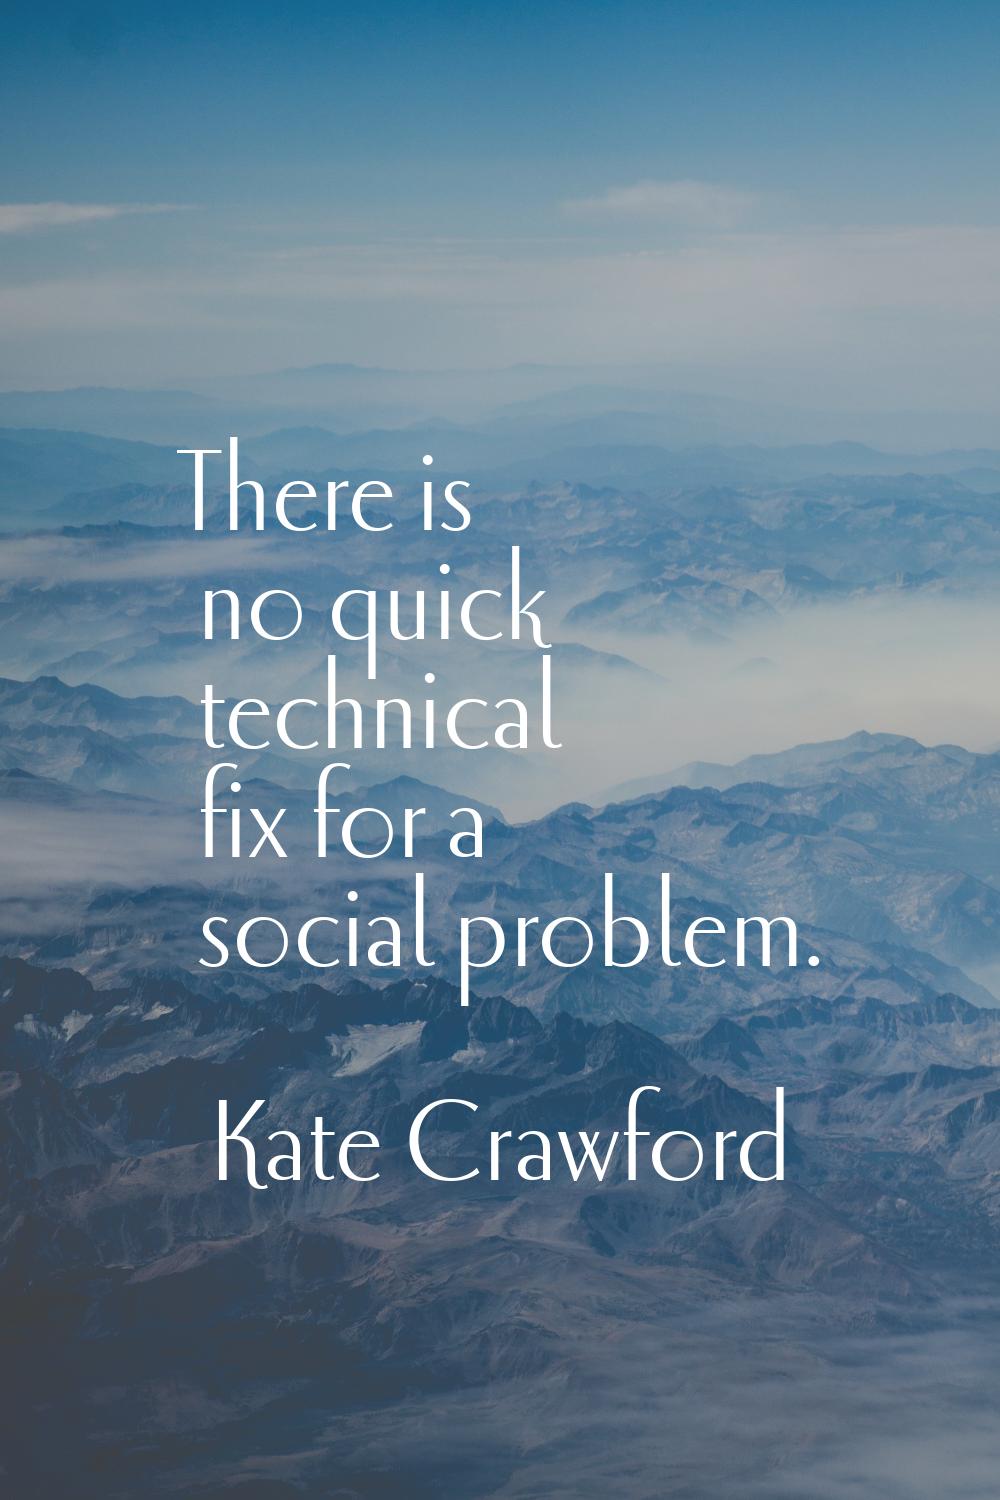 There is no quick technical fix for a social problem.